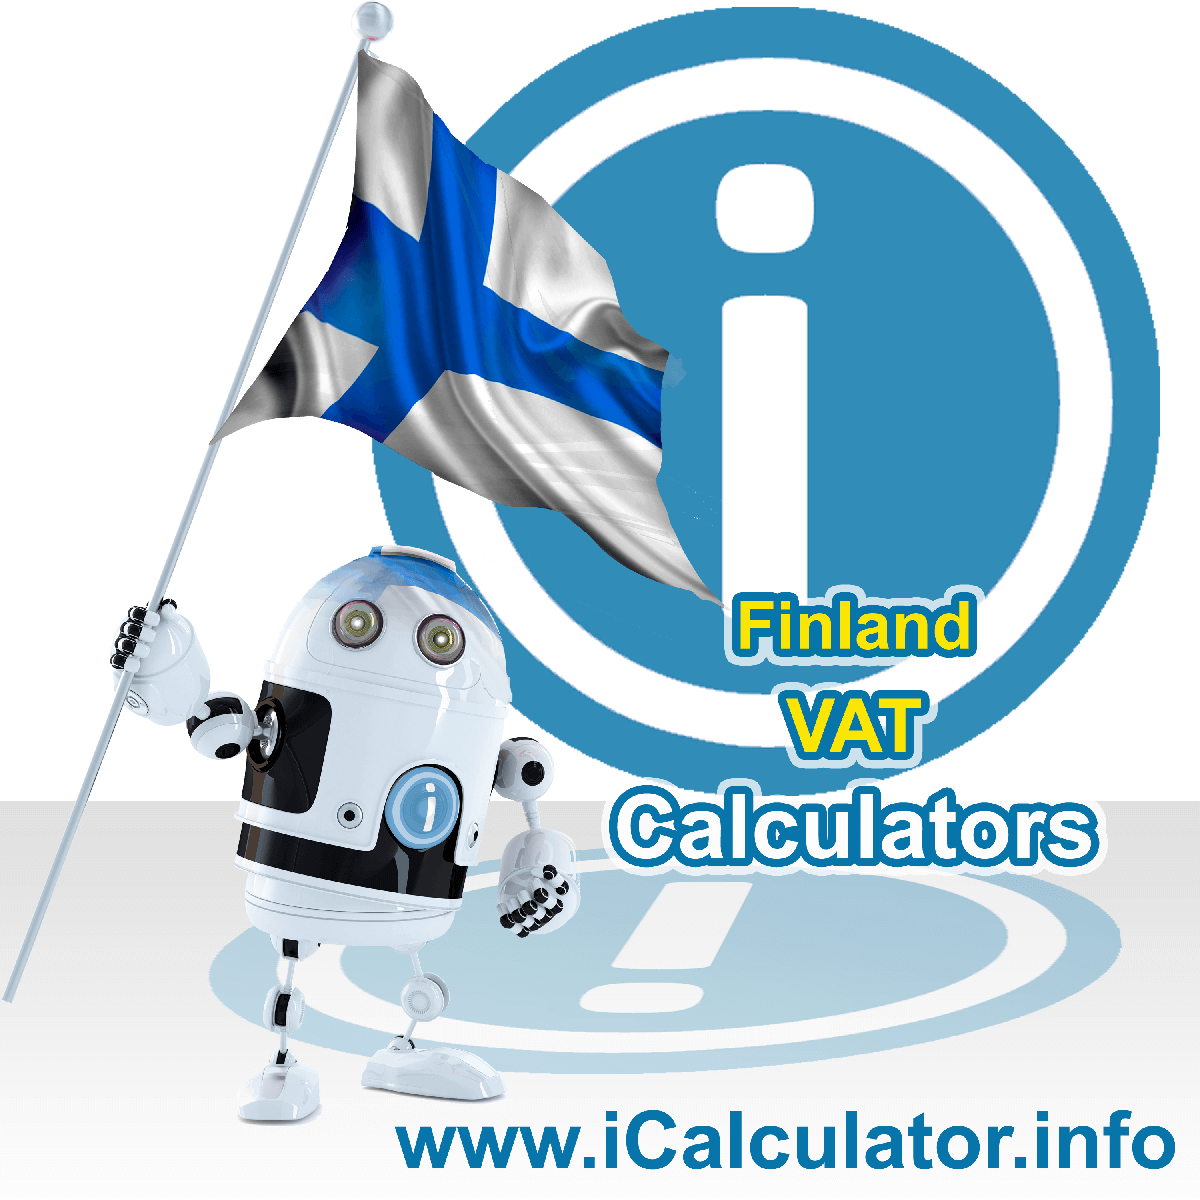 Finland VAT Calculator. This image shows the Finland flag and information relating to the VAT formula used for calculating Value Added Tax in Finland using the Finland VAT Calculator in 2023